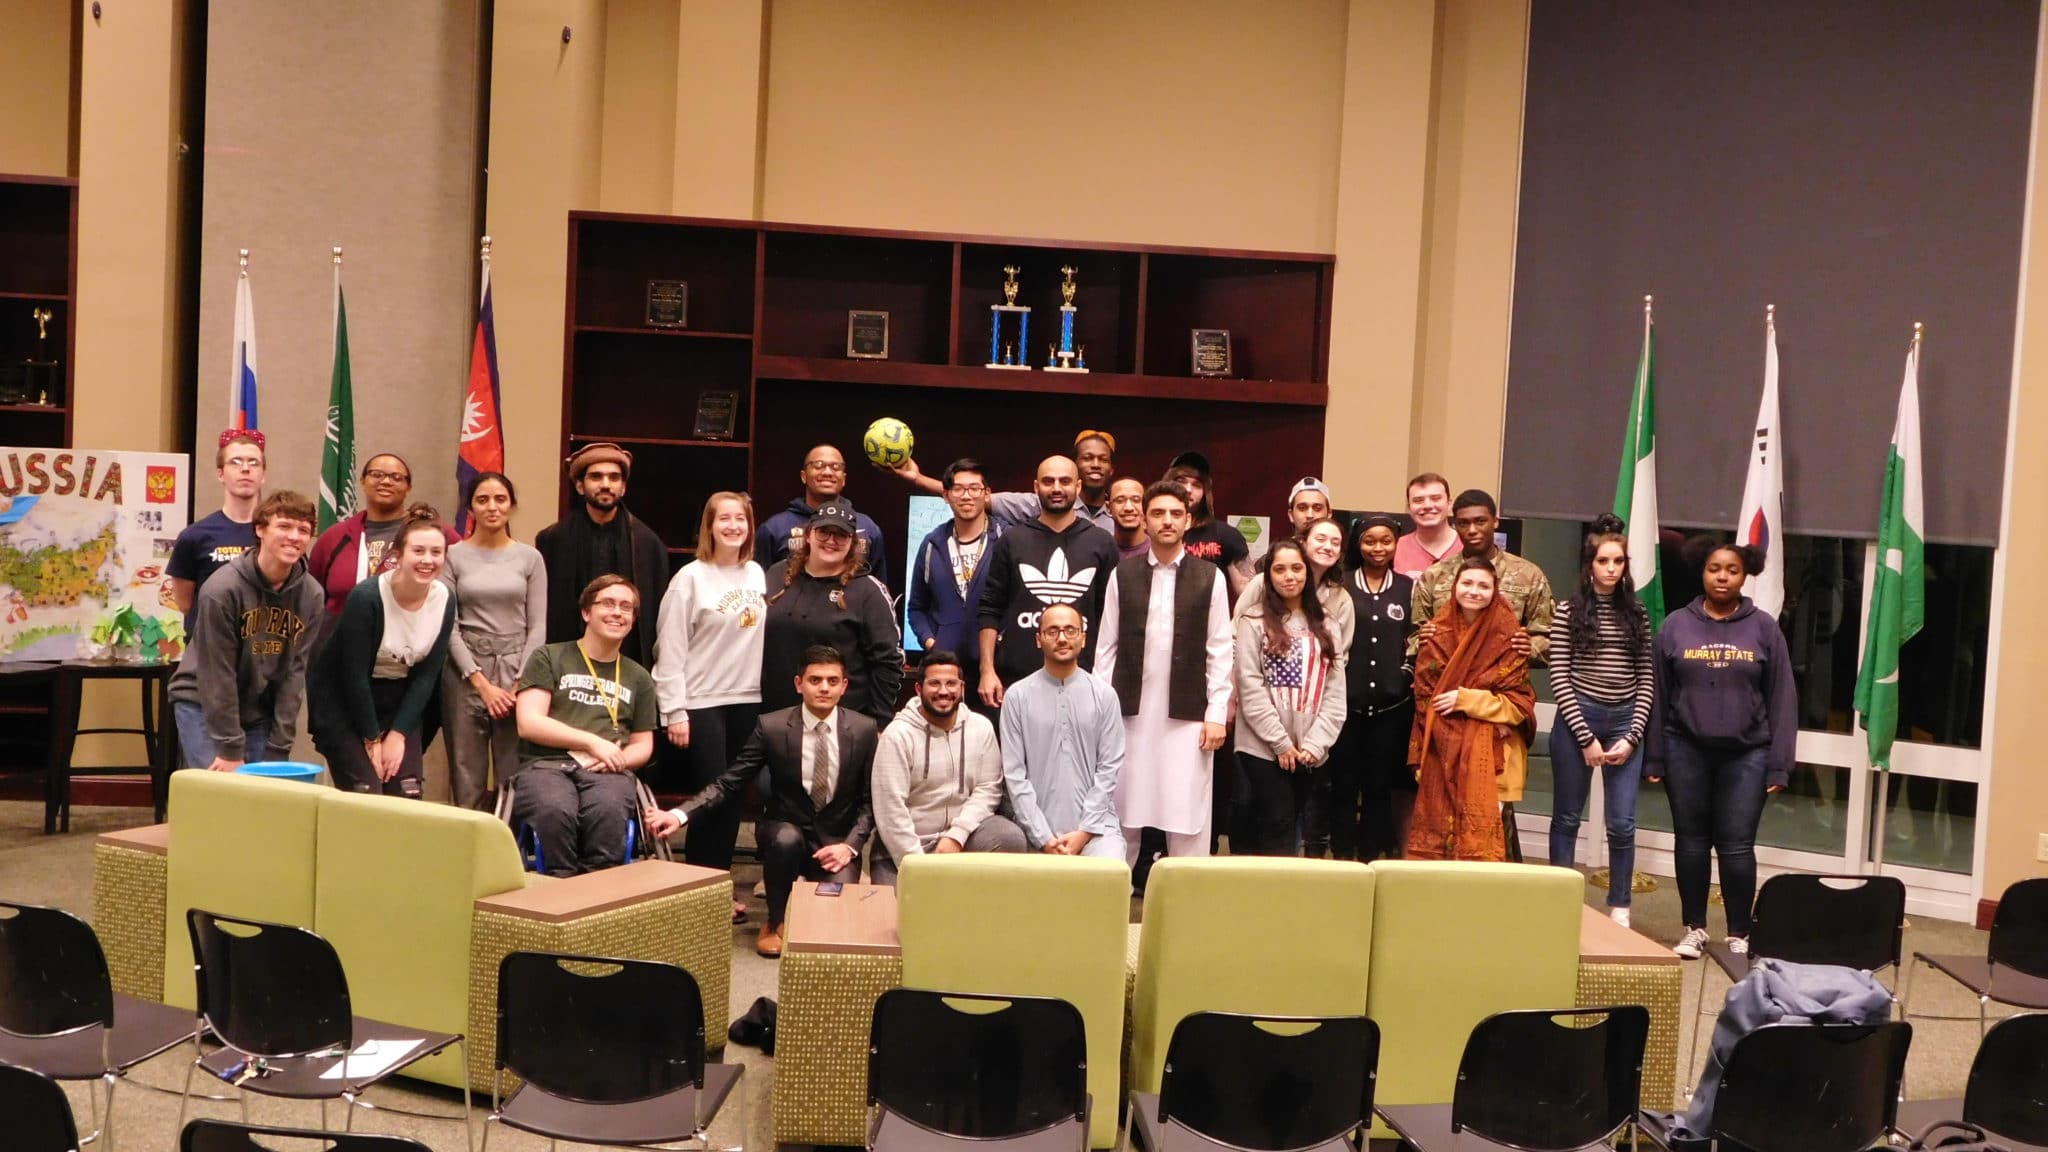 international students at the HC Franklin Residence Hall following a cultural event